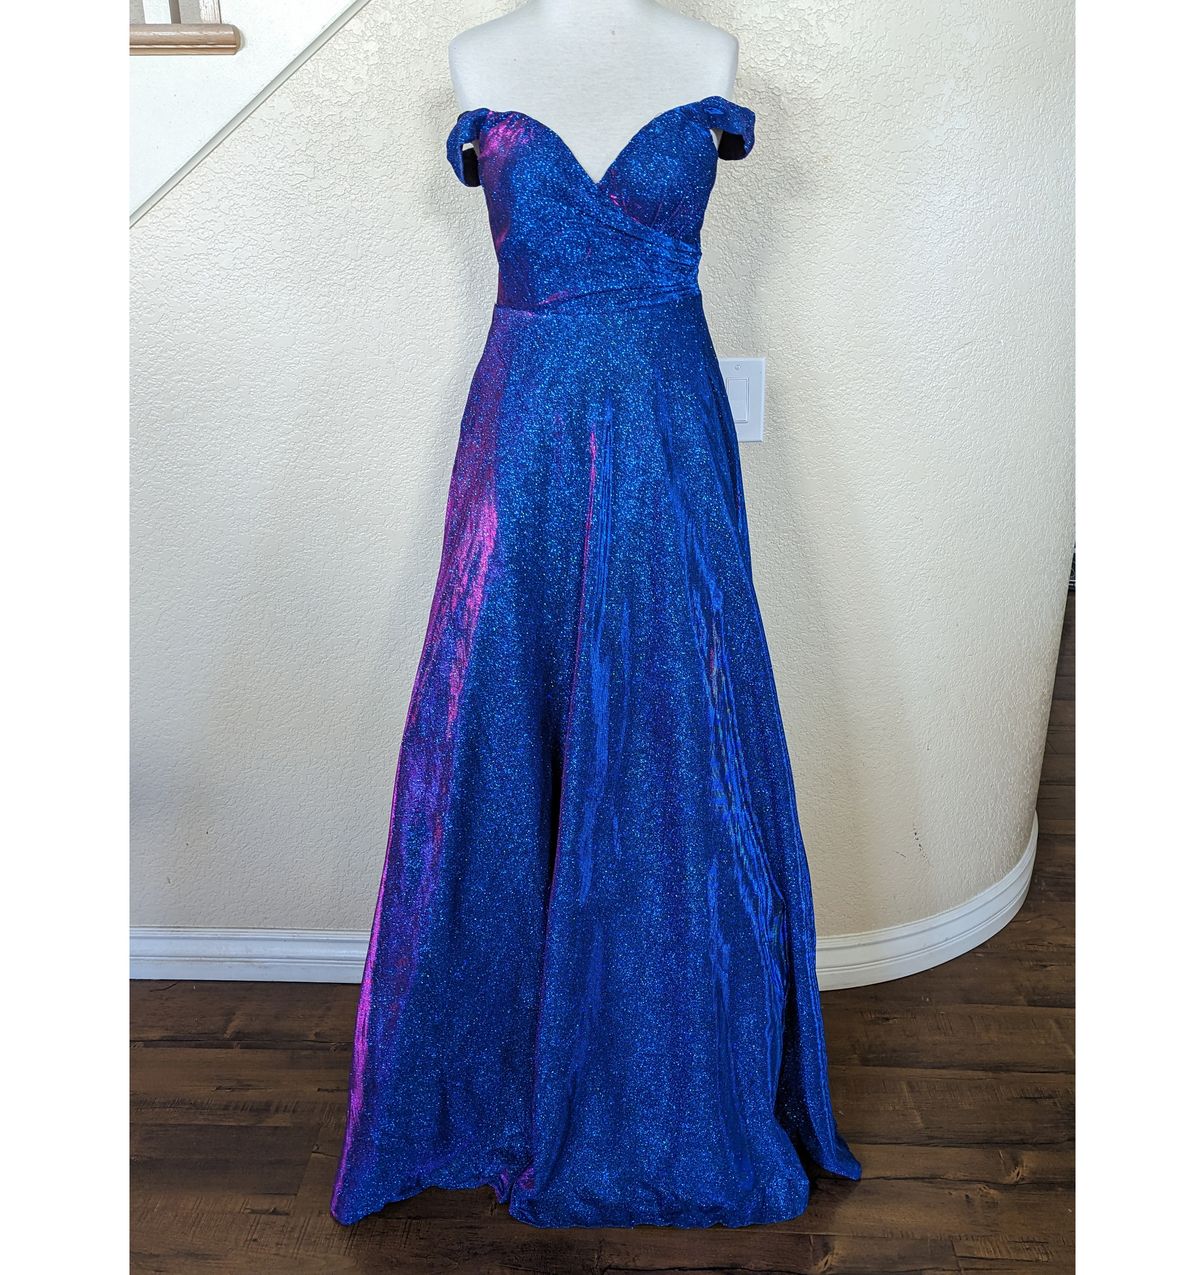 Style Electric Blue Off The Shoulder Sweetheart Metallic Formal Prom Ball Gown Dress Size 6 Prom Off The Shoulder Blue Ball Gown on Queenly